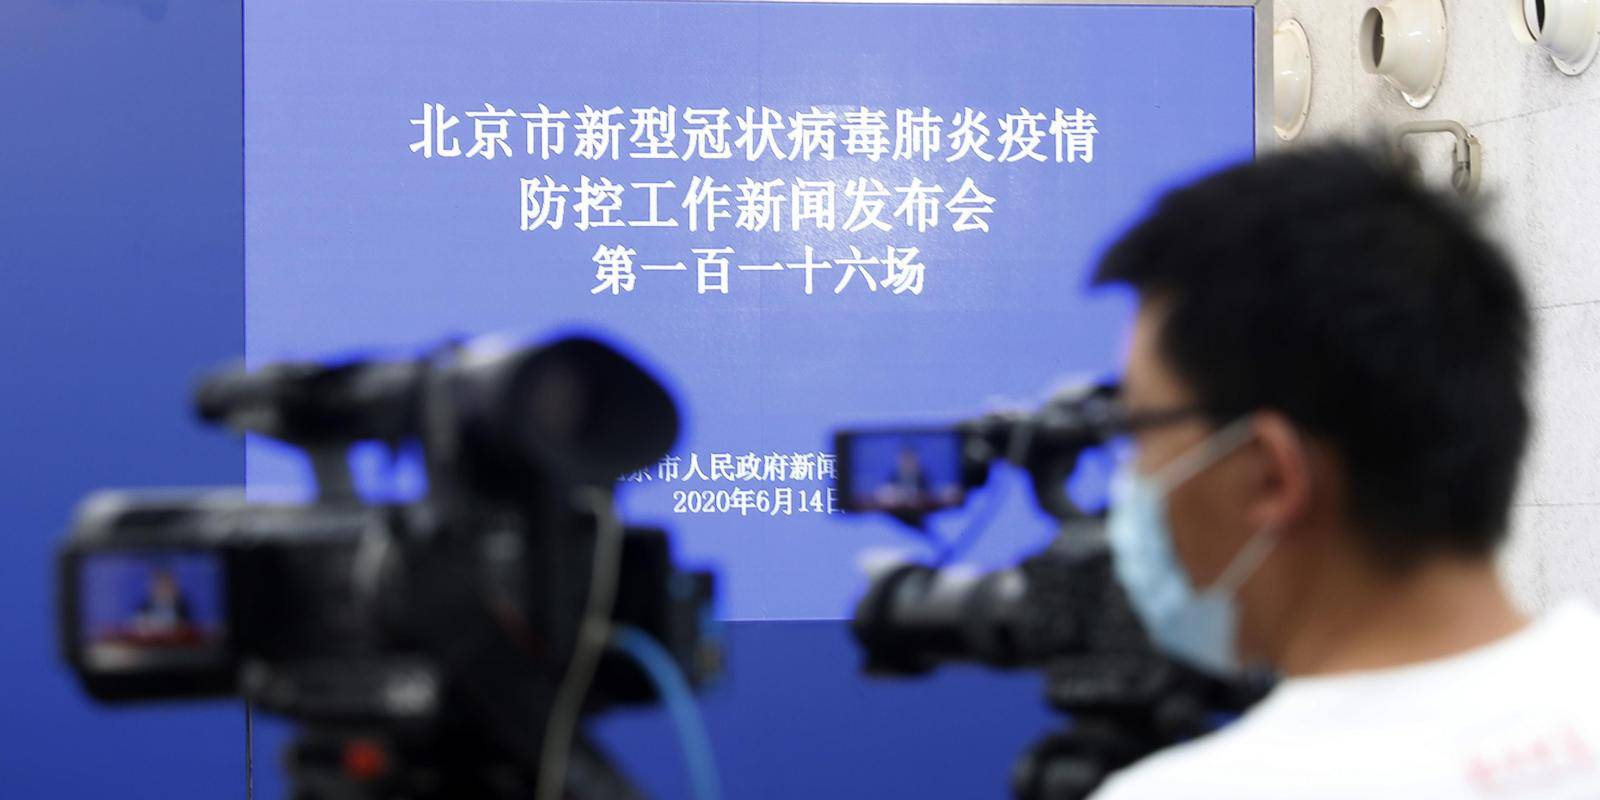 A press conference on the prevention and control work of the COVID-19 epidemic is held by the Information Office of Beijing Municipality on 14 June 2020 in Beijing.